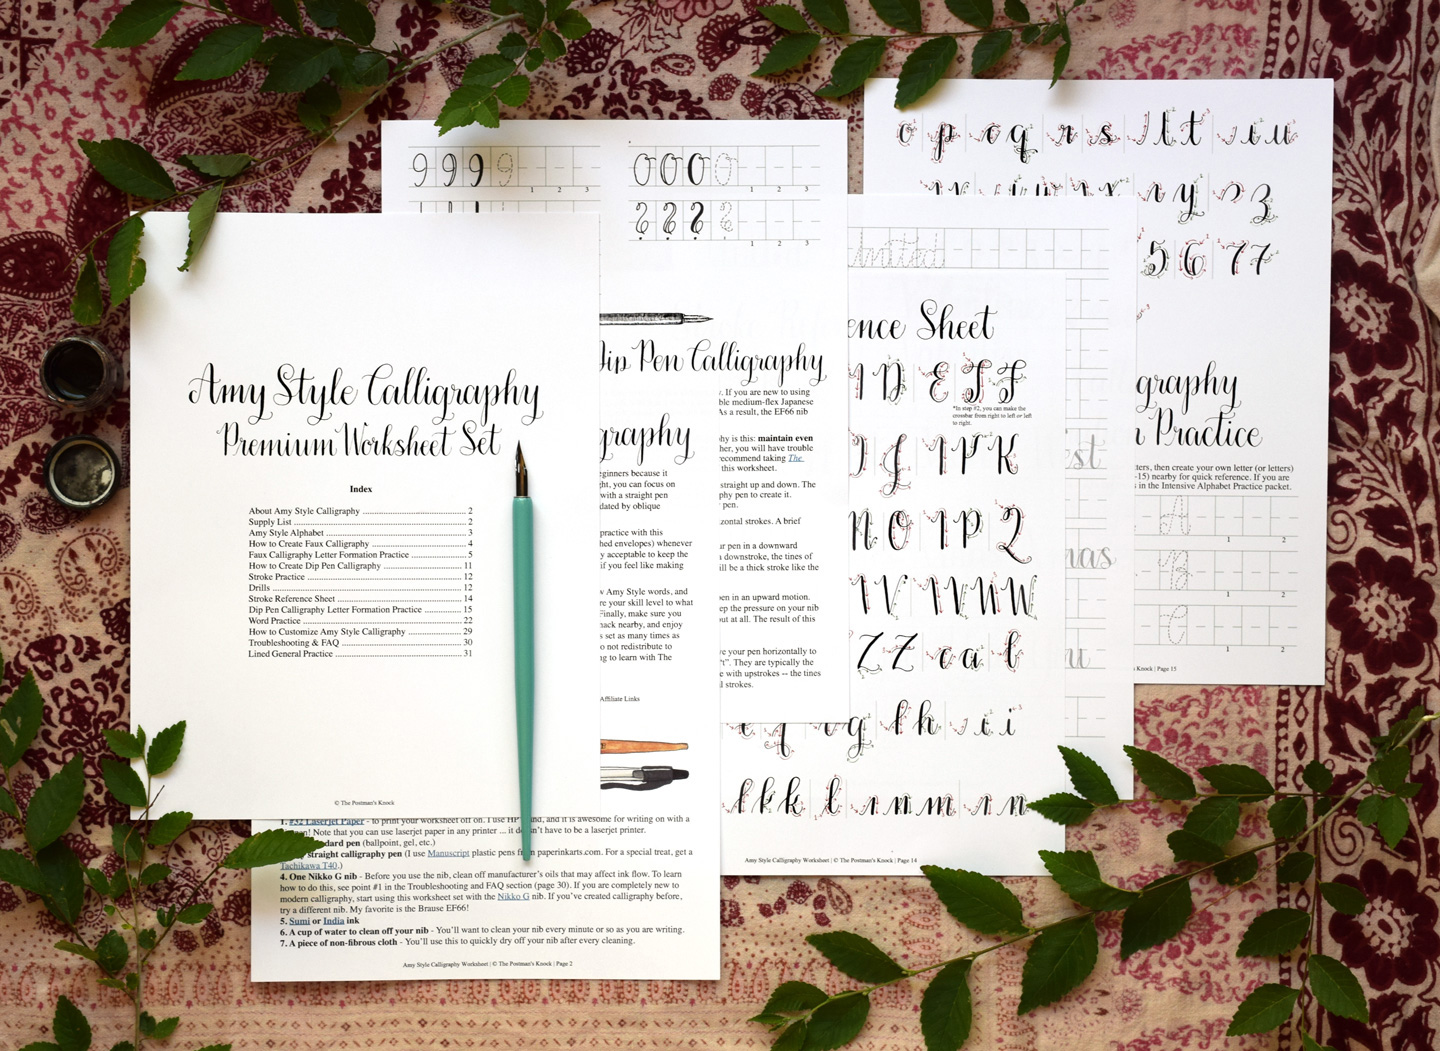 Introducing the New Amy Style Calligraphy Worksheet